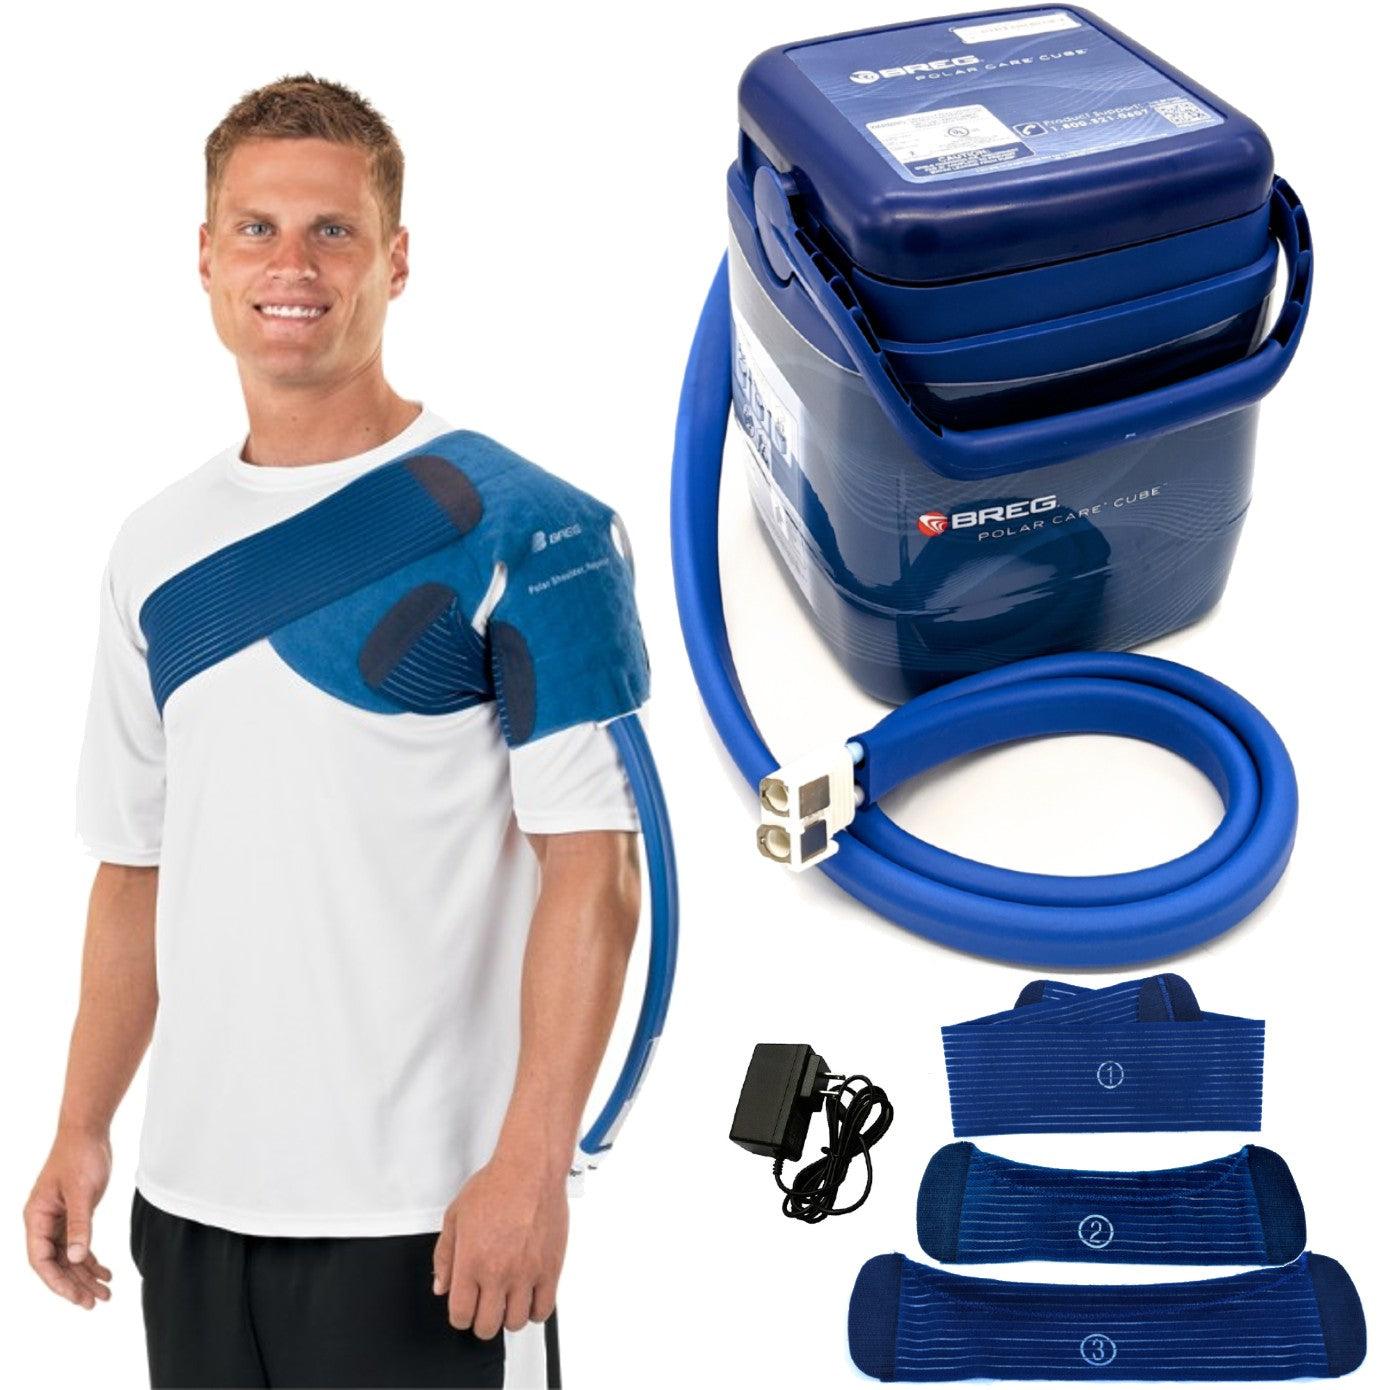 Breg® Polar Care Cube System w/ Wrap-On Pads - 10701-04900 Breg® Polar Care Cube System w/ Wrap-On Pads - undefined by Supply Physical Therapy Breg, Cold Therapy Units, Combos, Cube